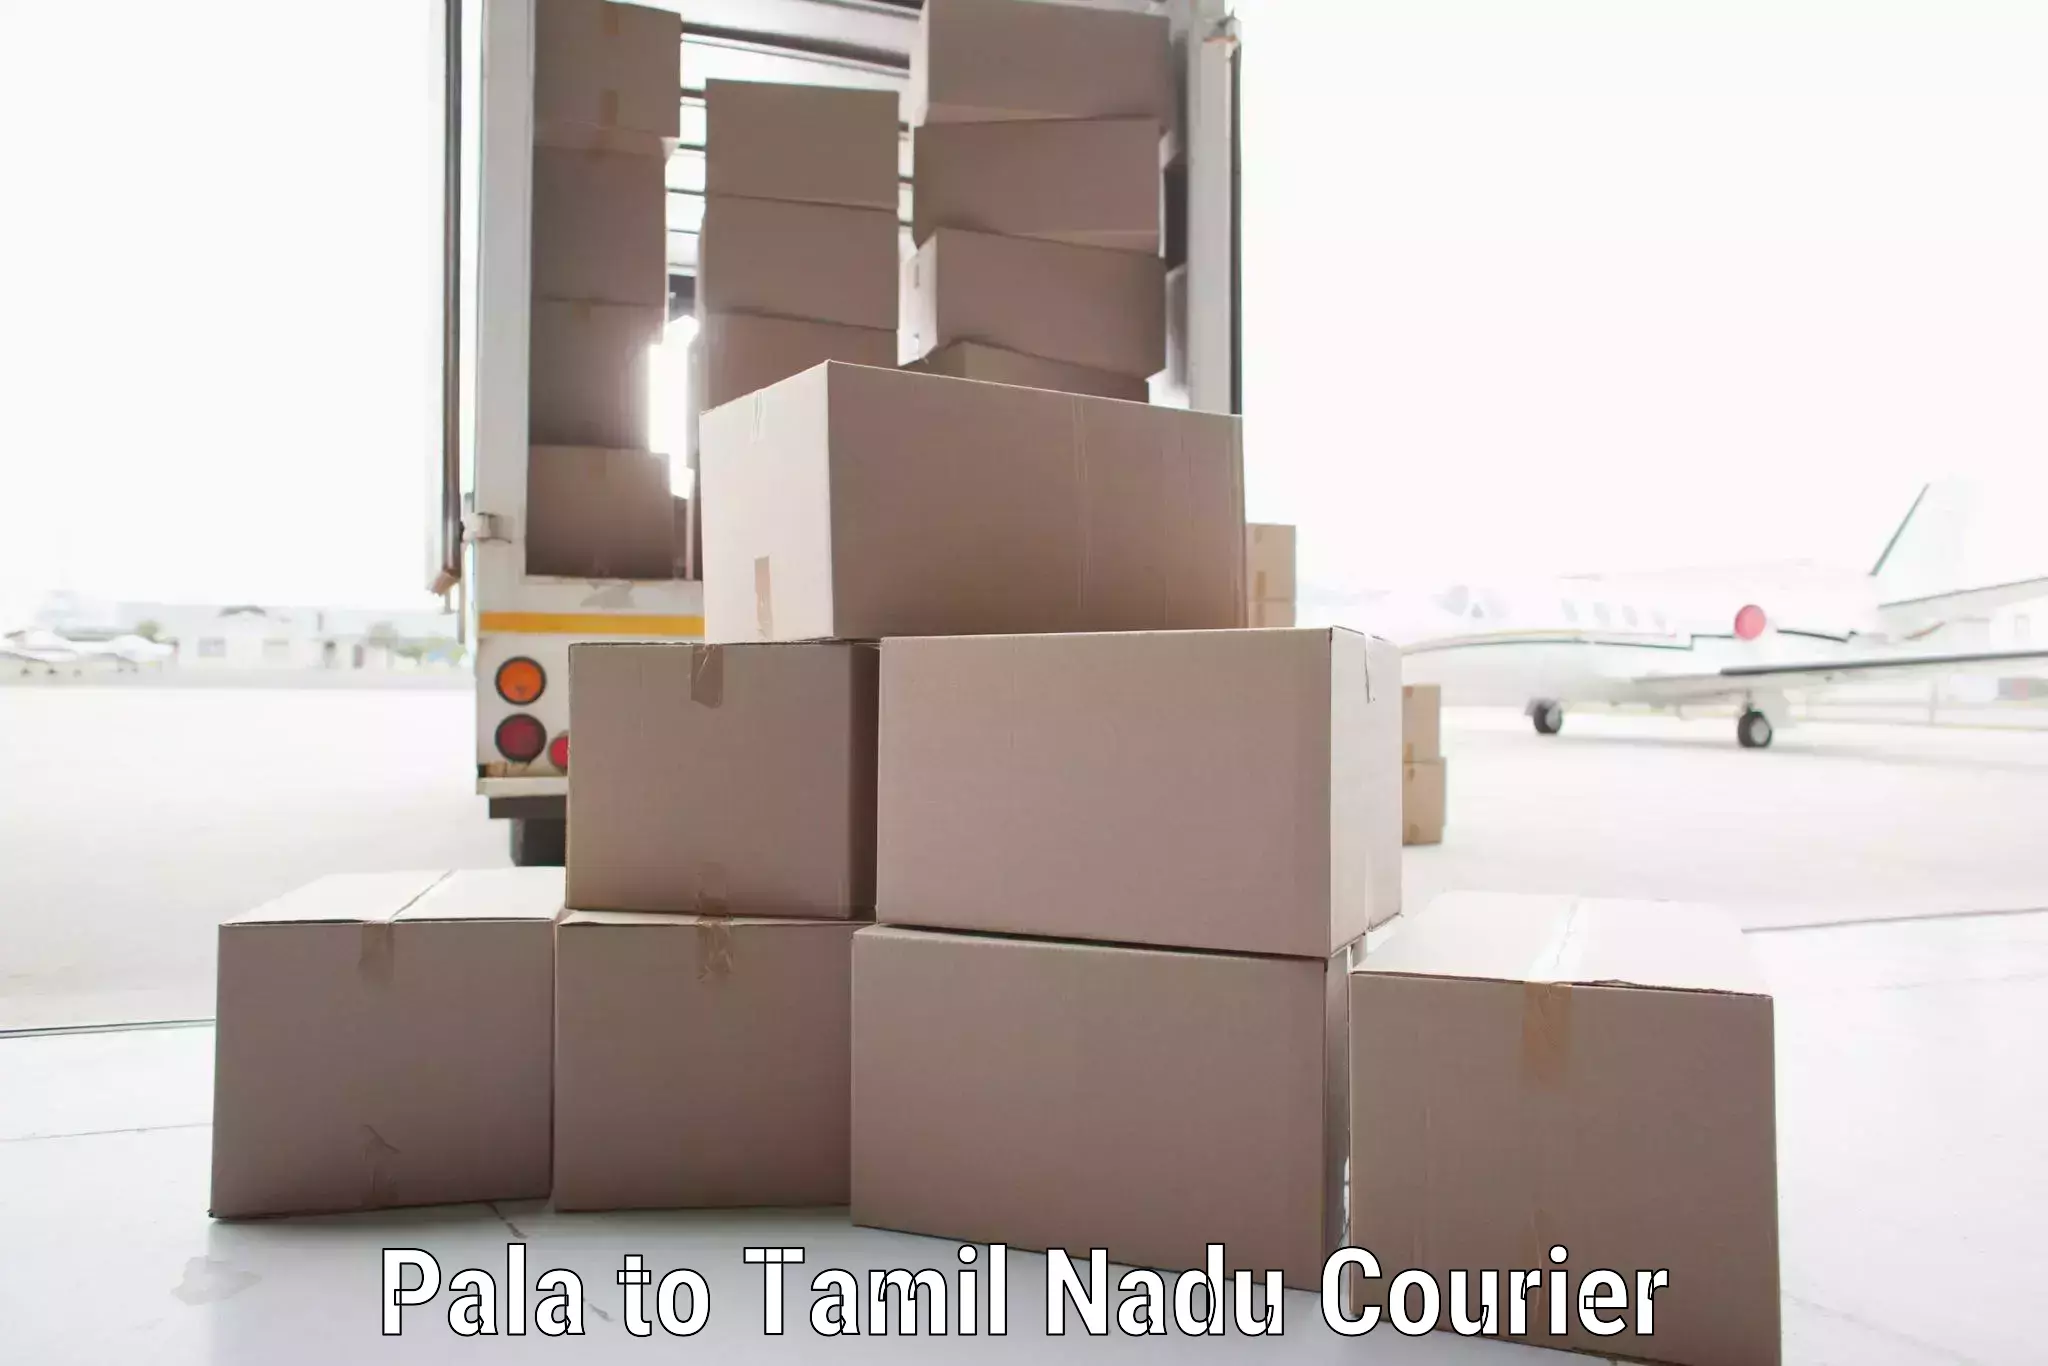 Air courier services Pala to Tiruchi